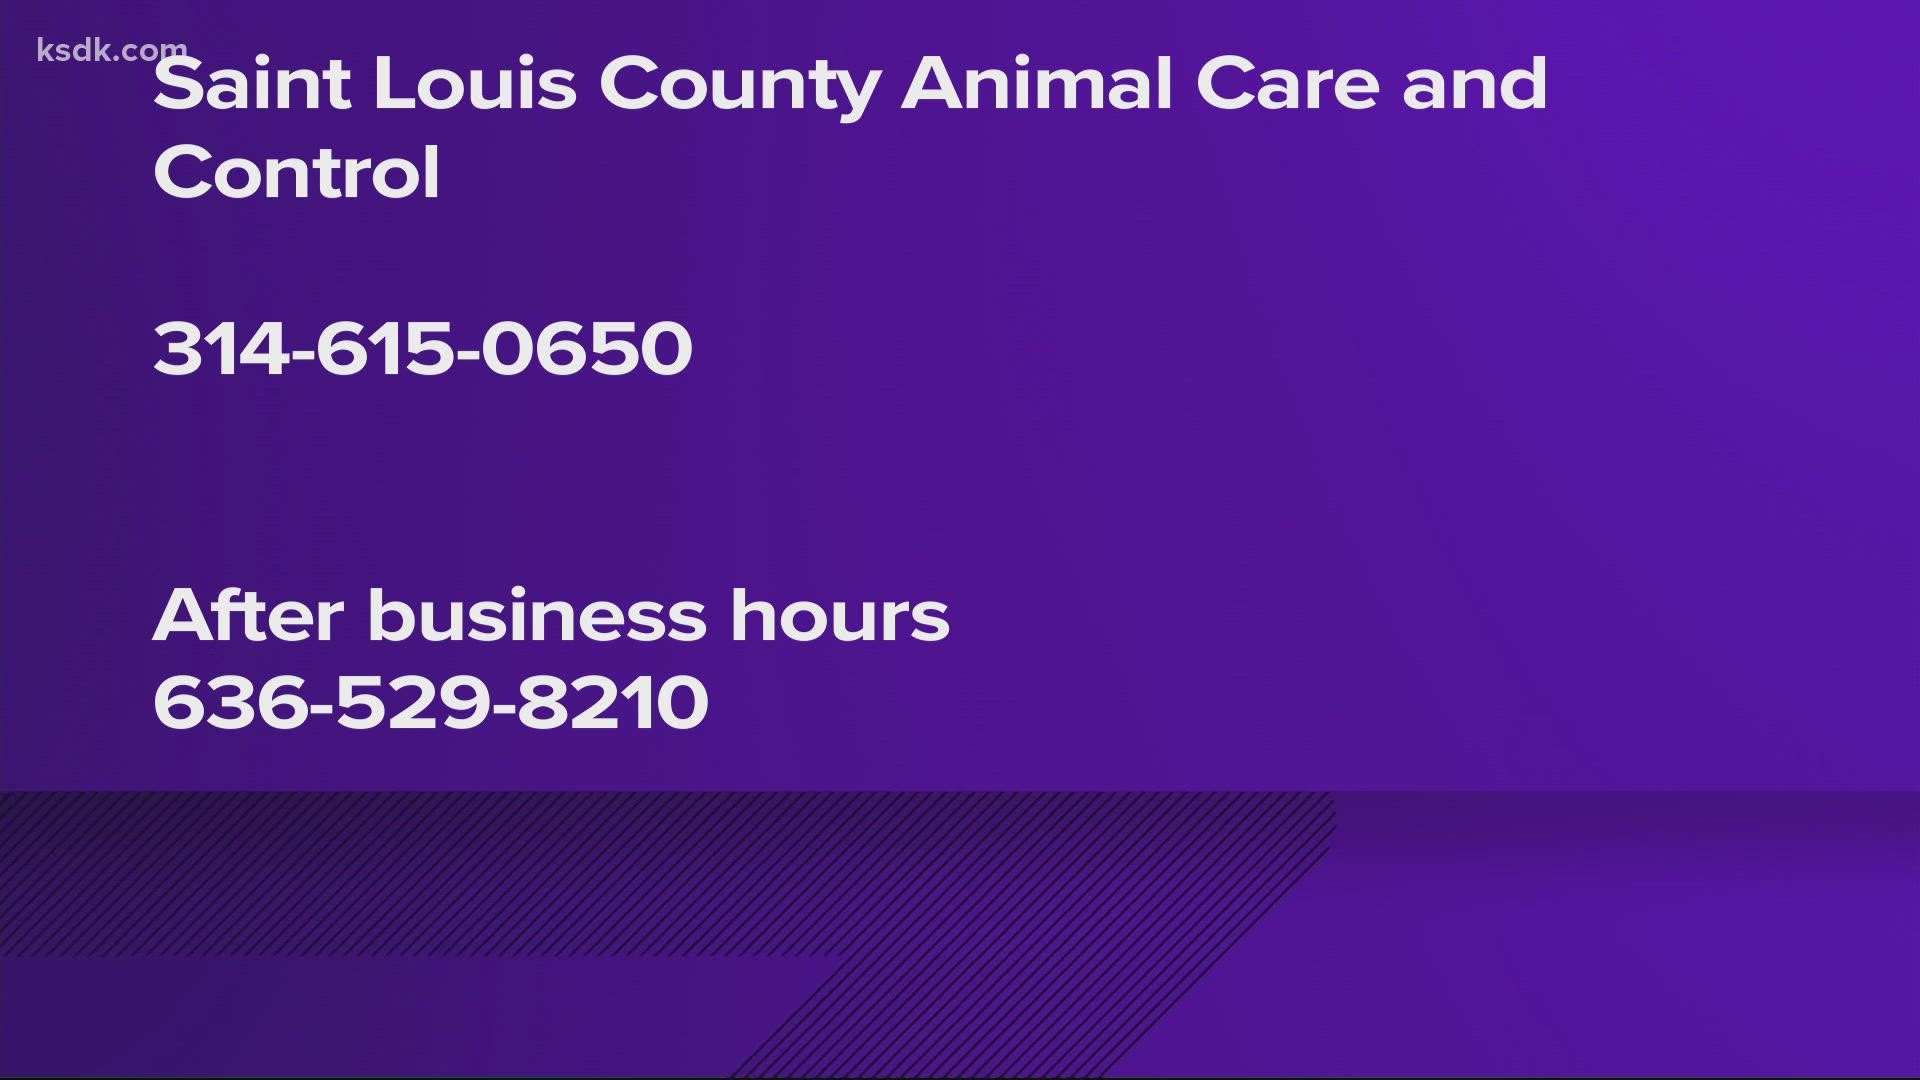 A Ballwin man became the first St. Louis County resident to contract rabies this year after being bitten by a bat last week.